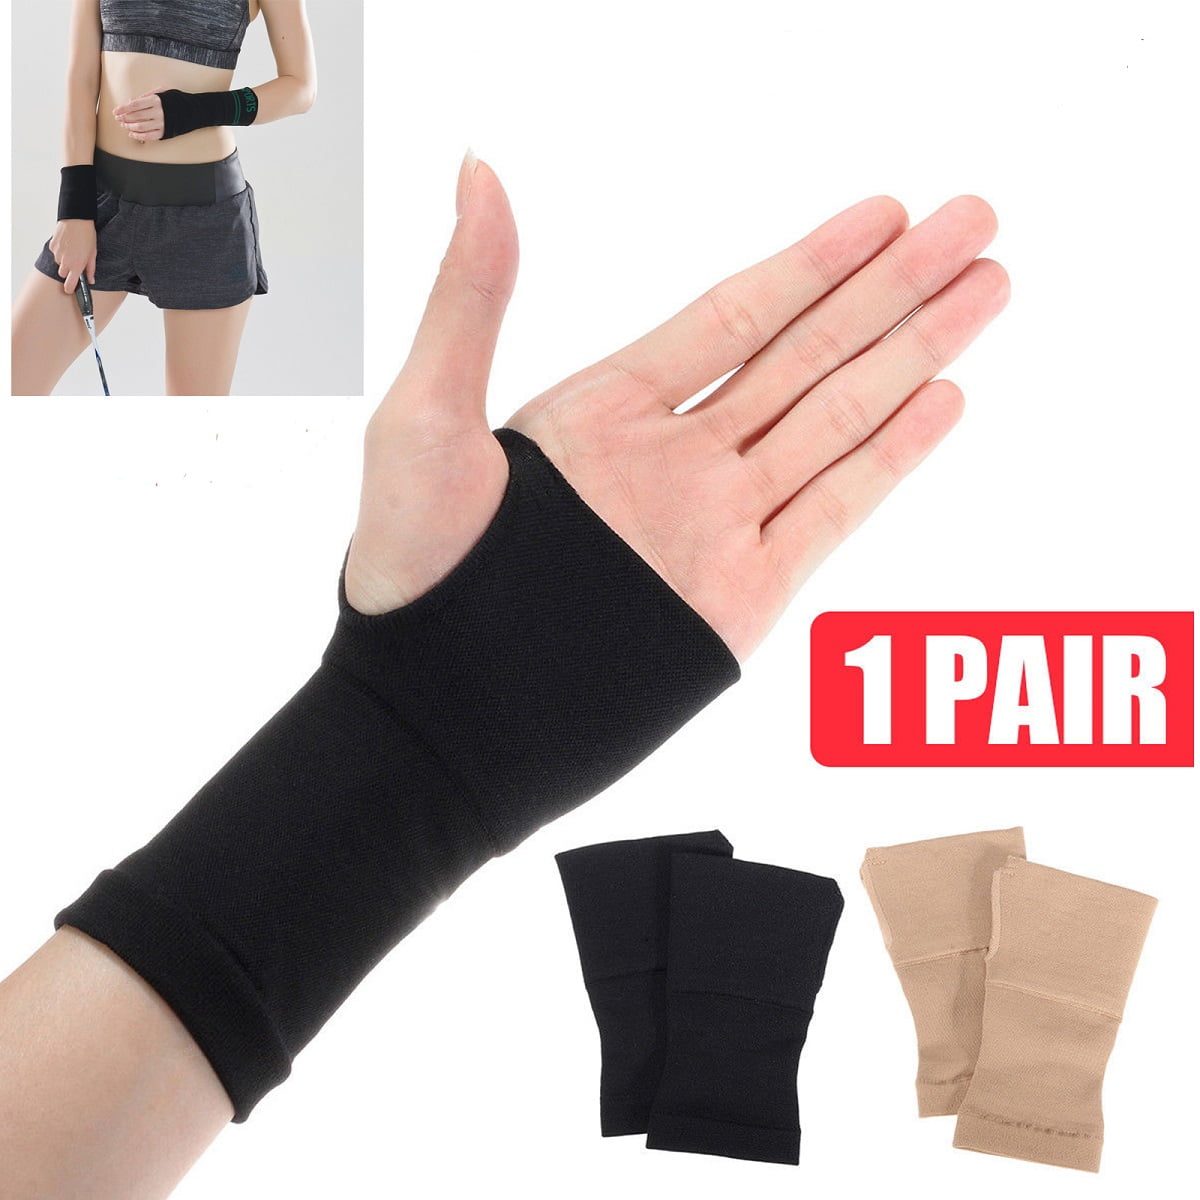 Wrist Support Brace Carpal Tunnel Exercise Gloves Wrap Compression Glove 2 Pair